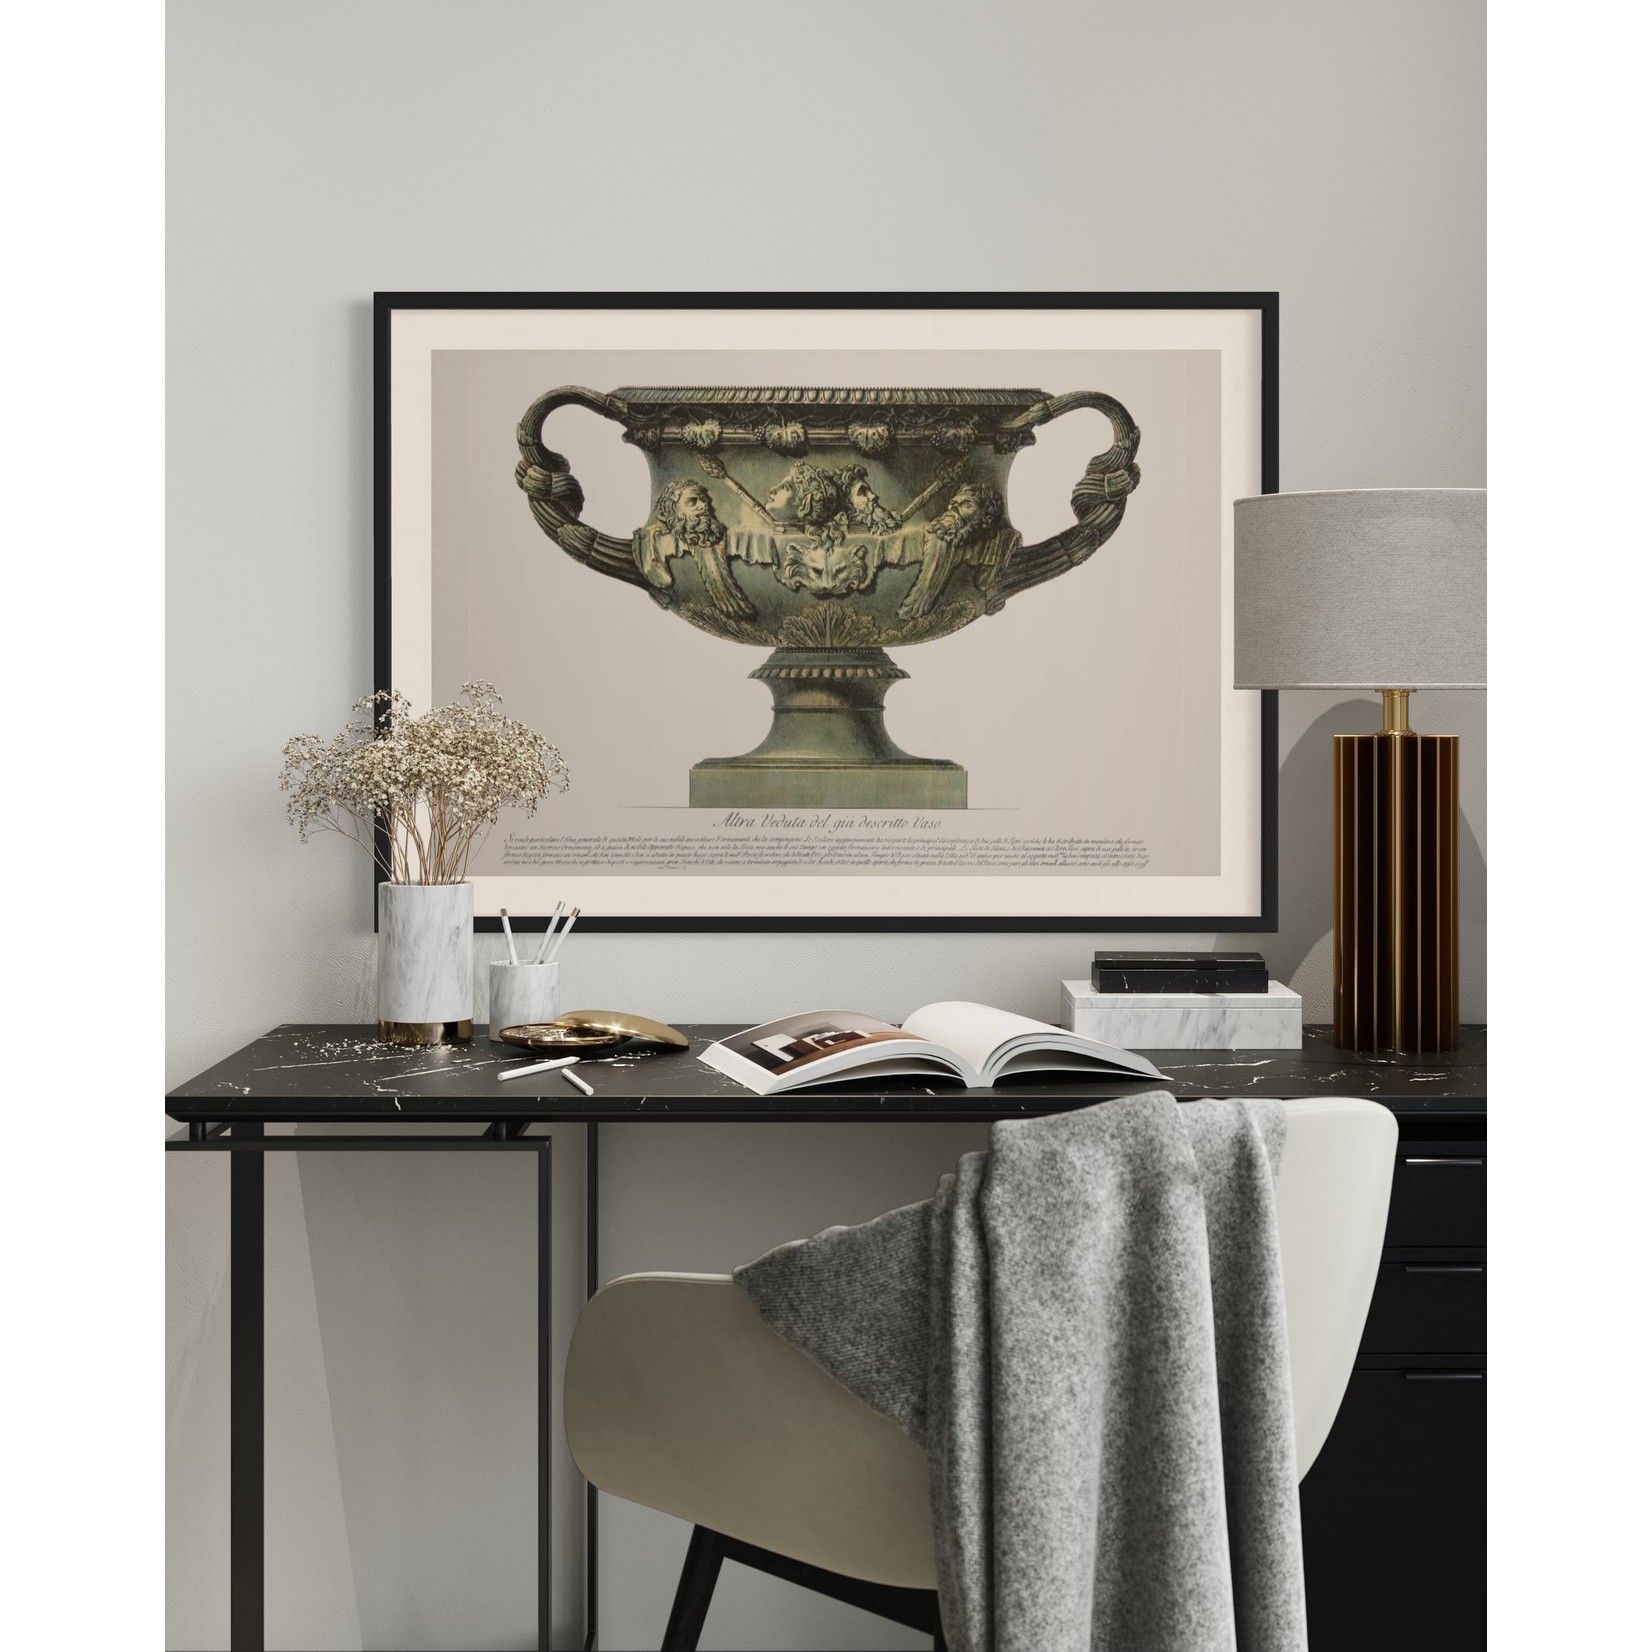 Framed Print on Rag Paper: Wide Piranesi Urn with Handles in Green and Yellow